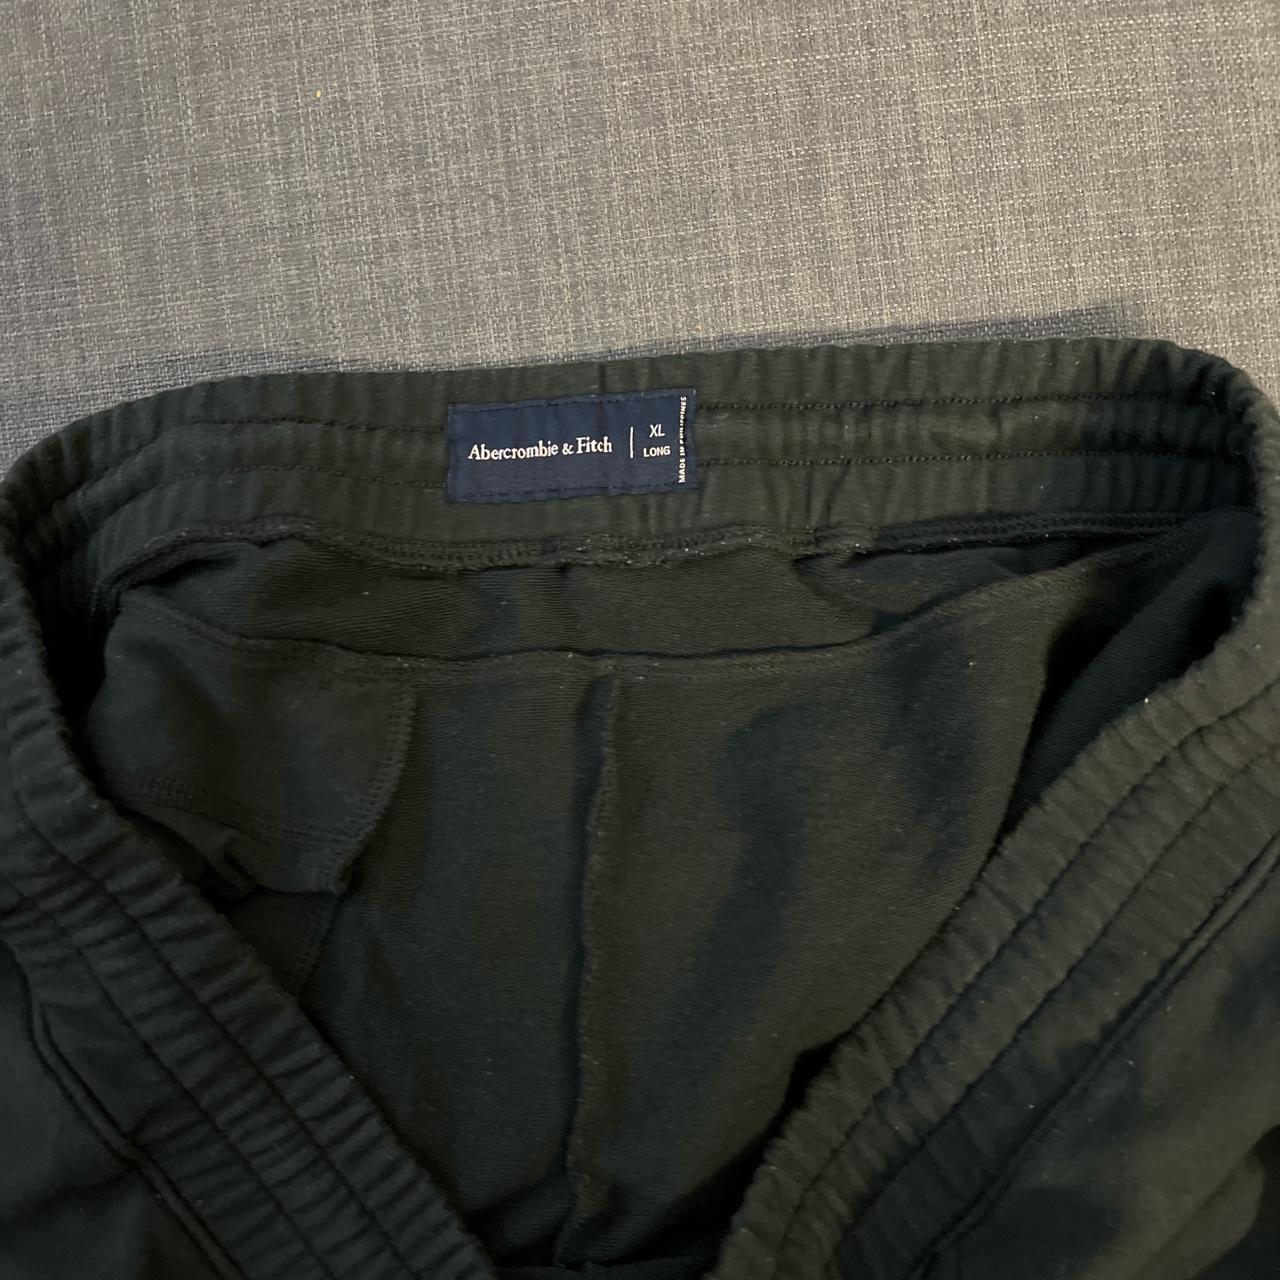 Abercrombie & Fitch Men's Joggers-tracksuits (3)